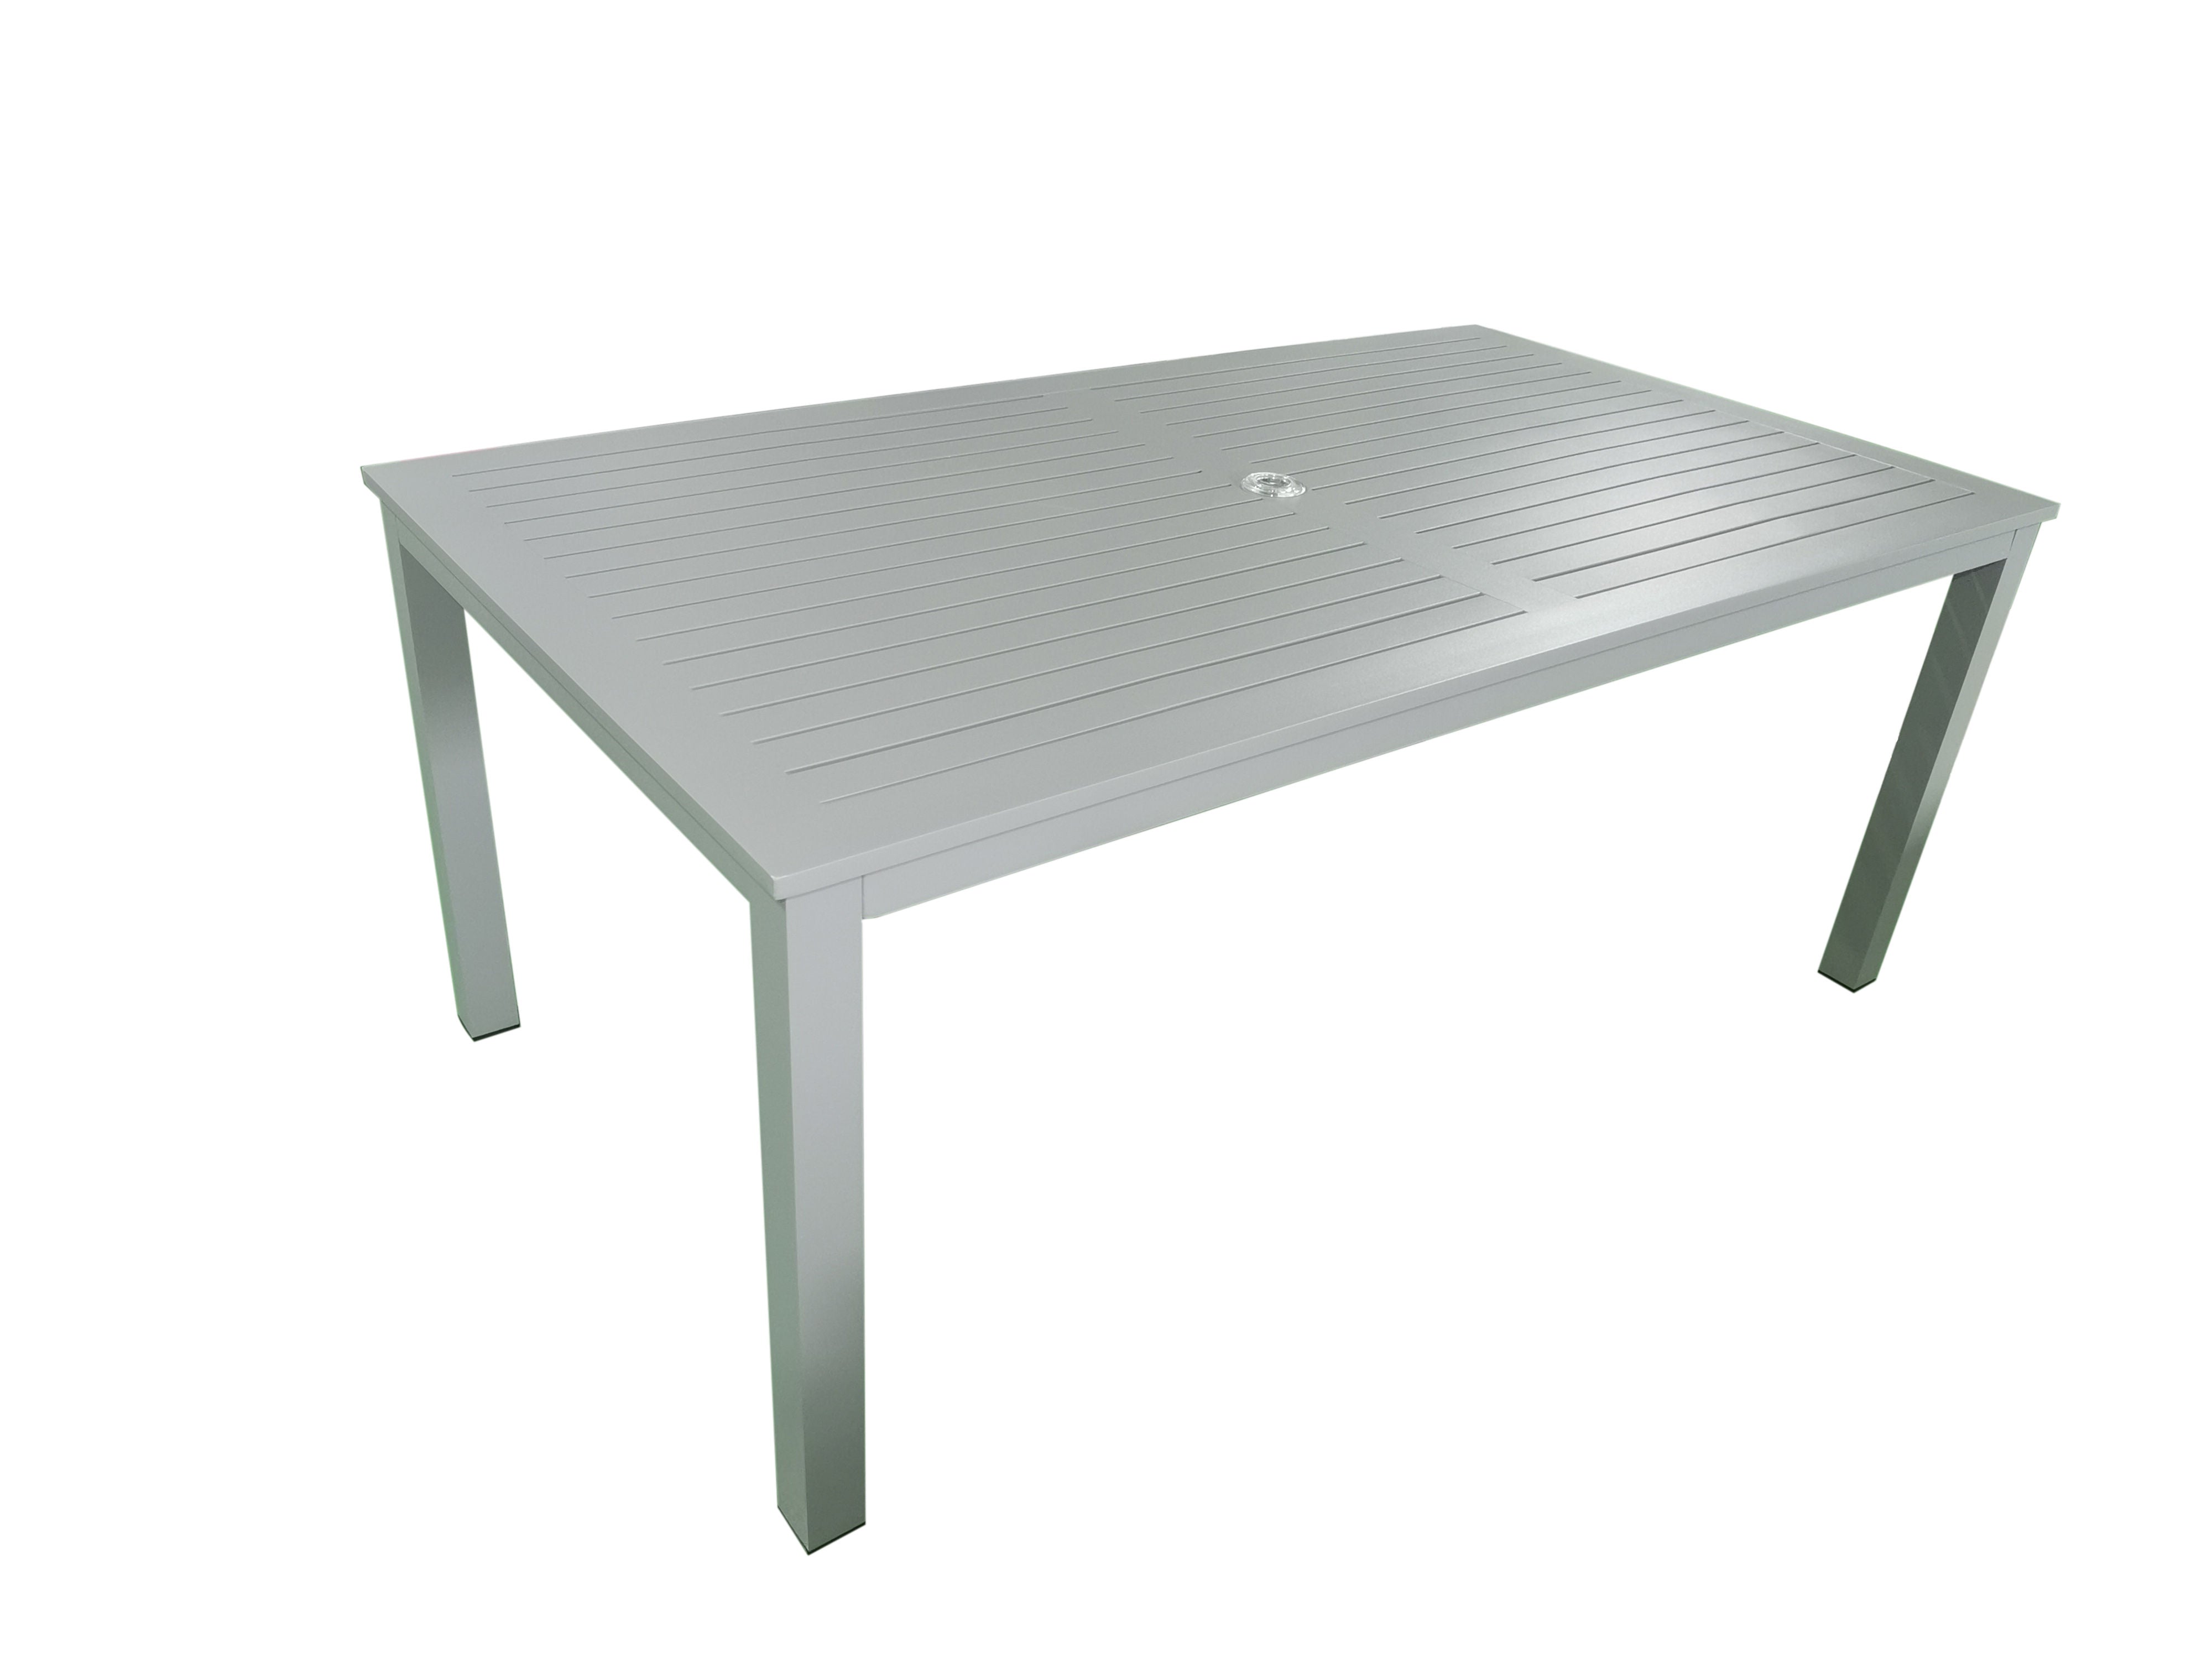 PatioZone Dining Table with Slated Tabletop w/Umbrella Hole in Middle and Aluminum Frame (MOSS-T297GP) - Matte Light Grey